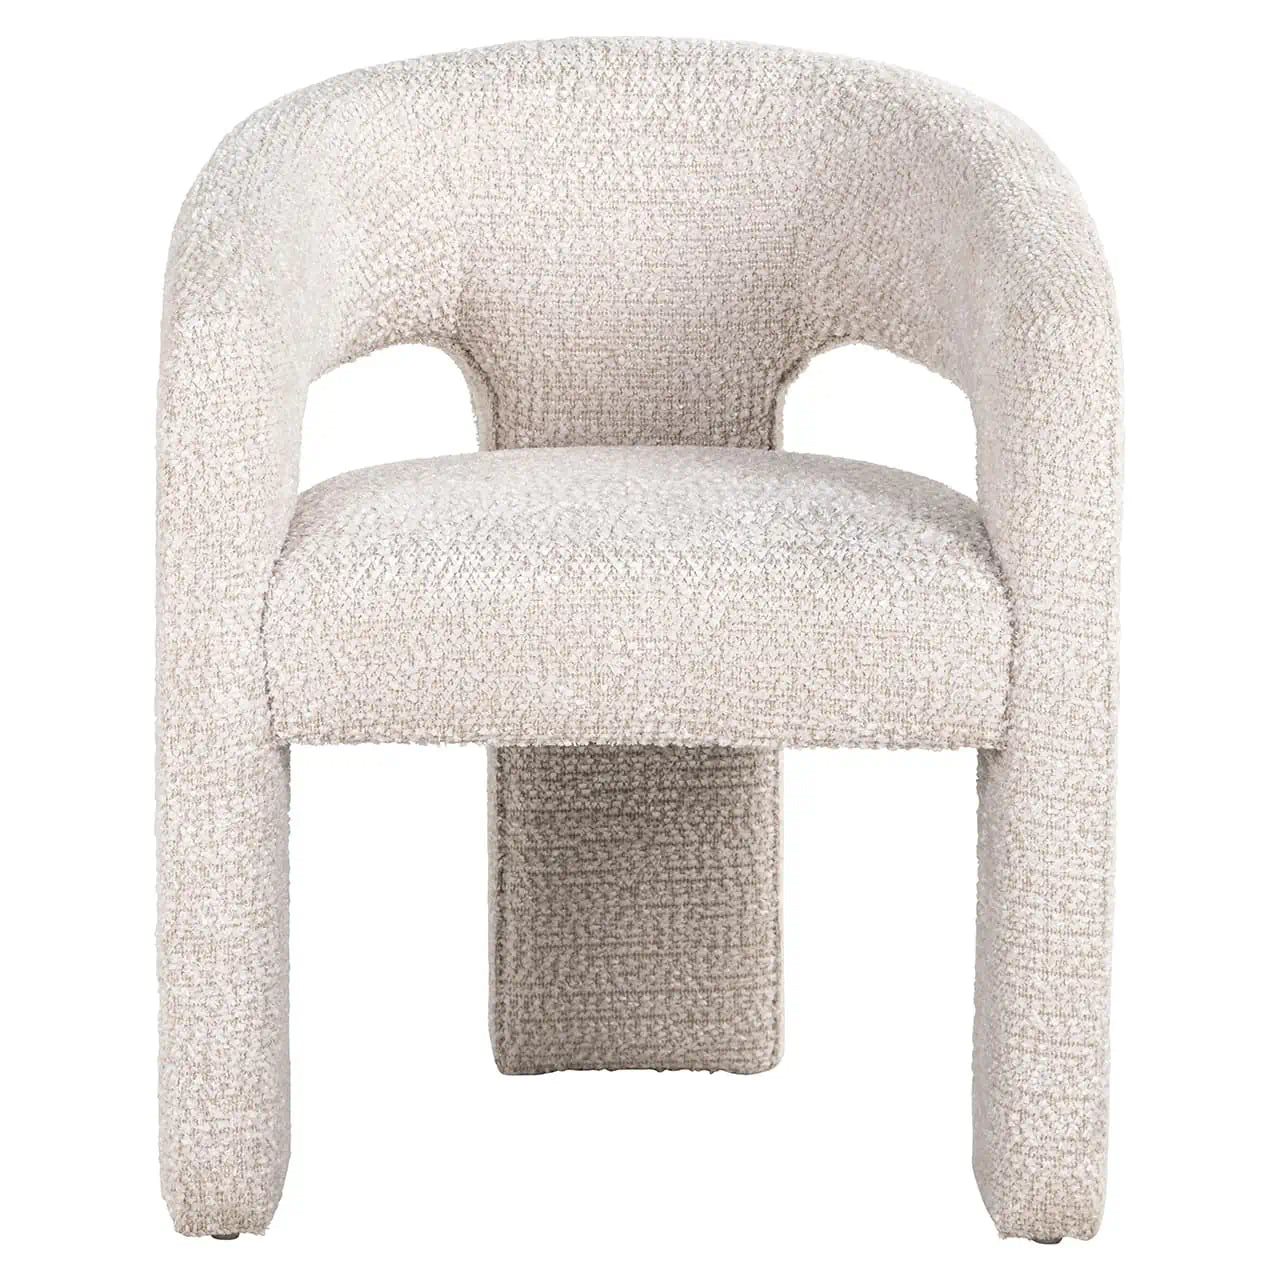 Richmond Interiors Belle Lovely Cream Boucle Fabric Dining Chair